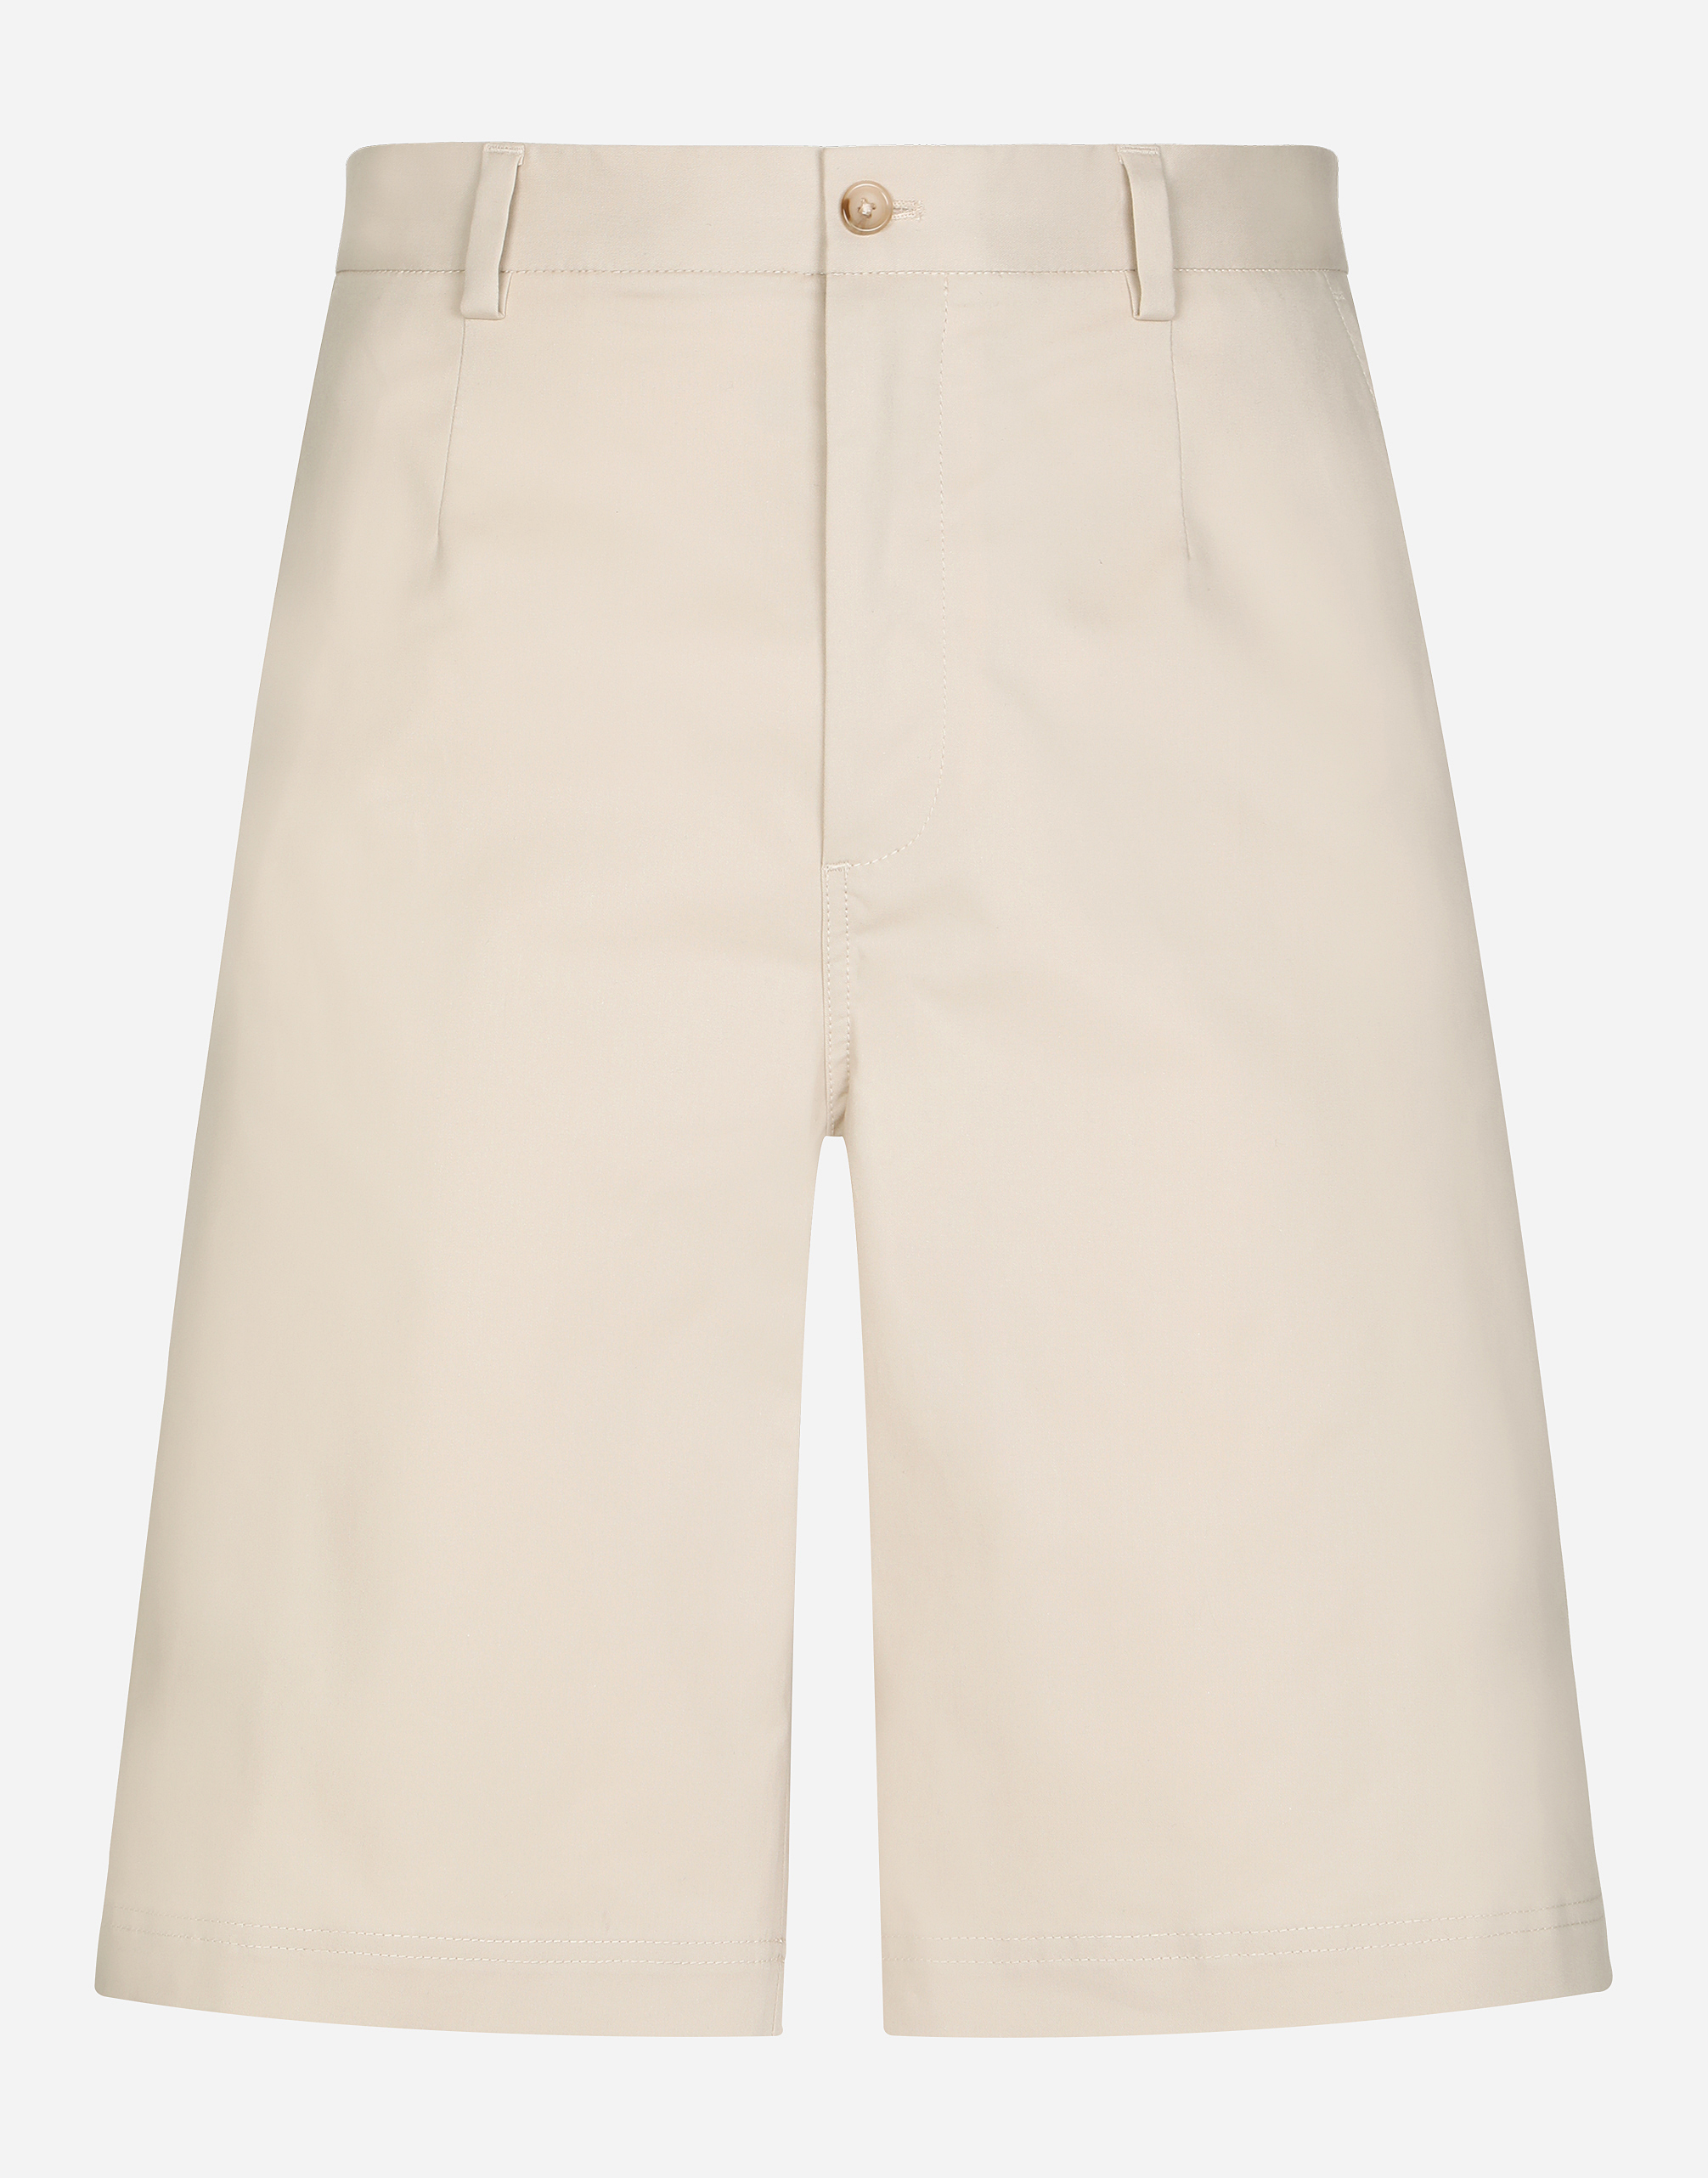 Stretch cotton shorts with branded tag in Beige